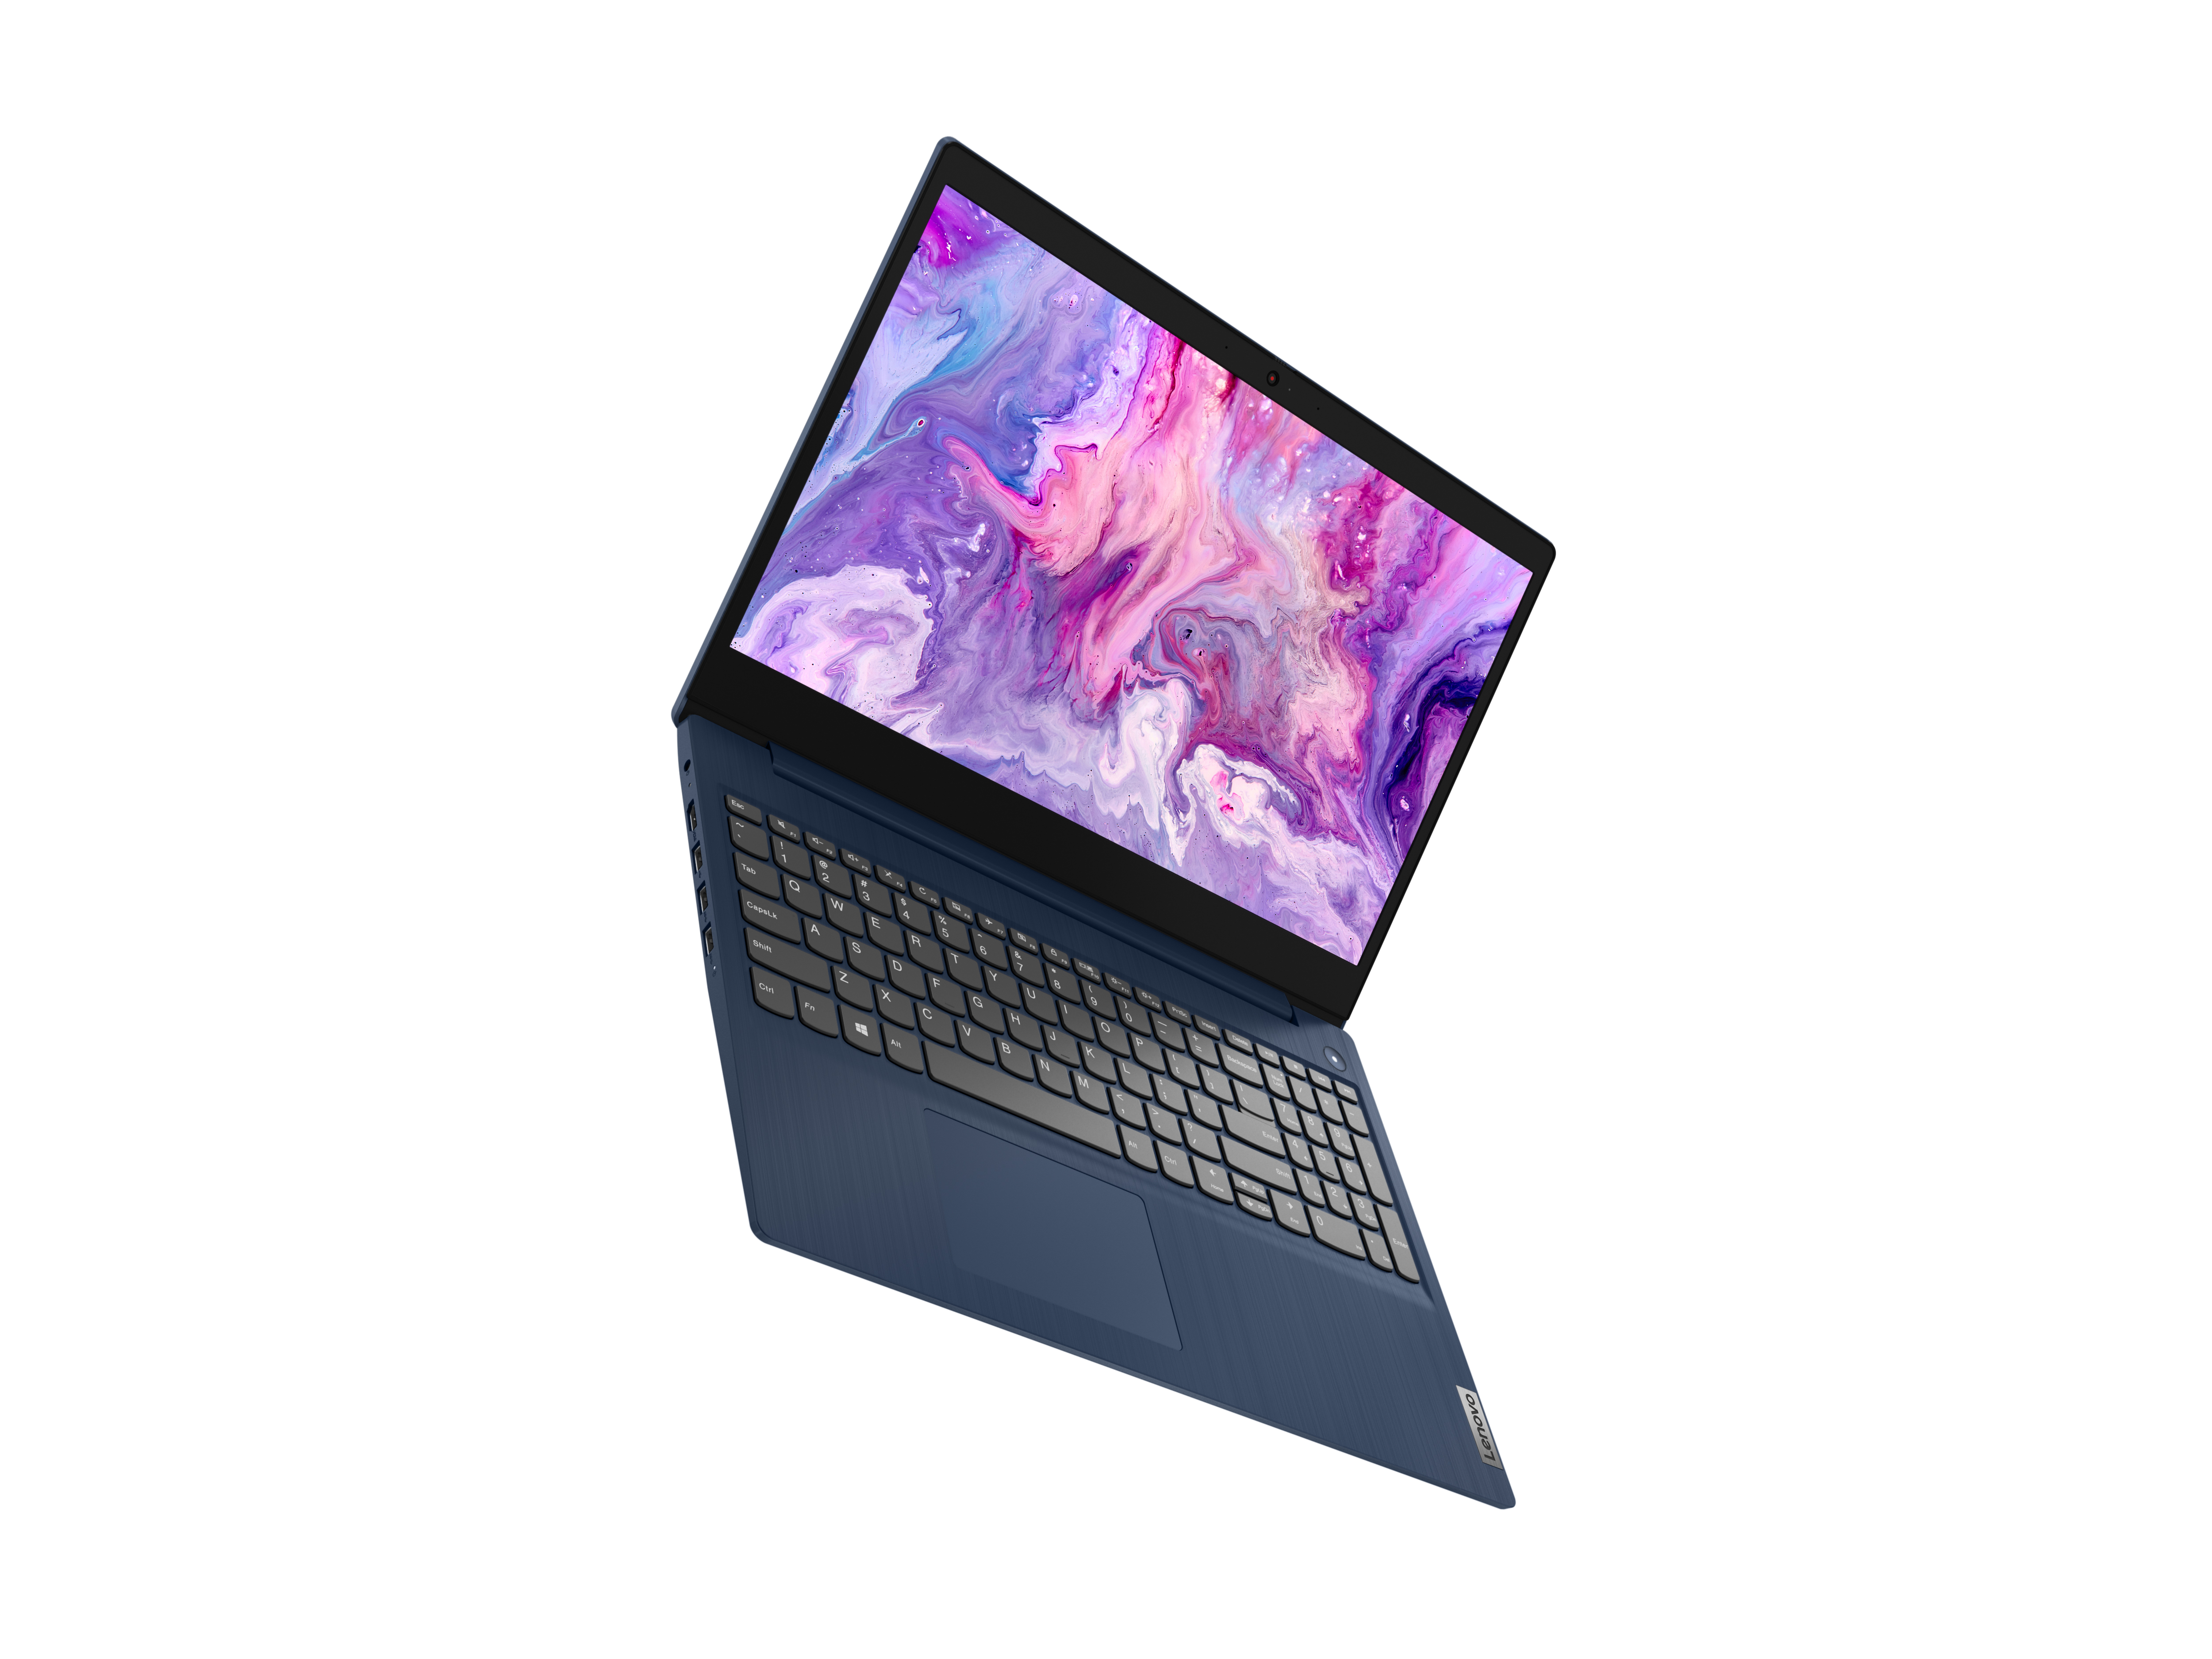 Lenovo IdeaPad 3 15" Laptop, Intel Core i3-1005G1 Dual-Core Processor, 8GB Memory, 256GB Solid State Drive, Windows 10S - Abyss Blue - 81WE008HUS (Google Classroom Compatible) - image 3 of 16